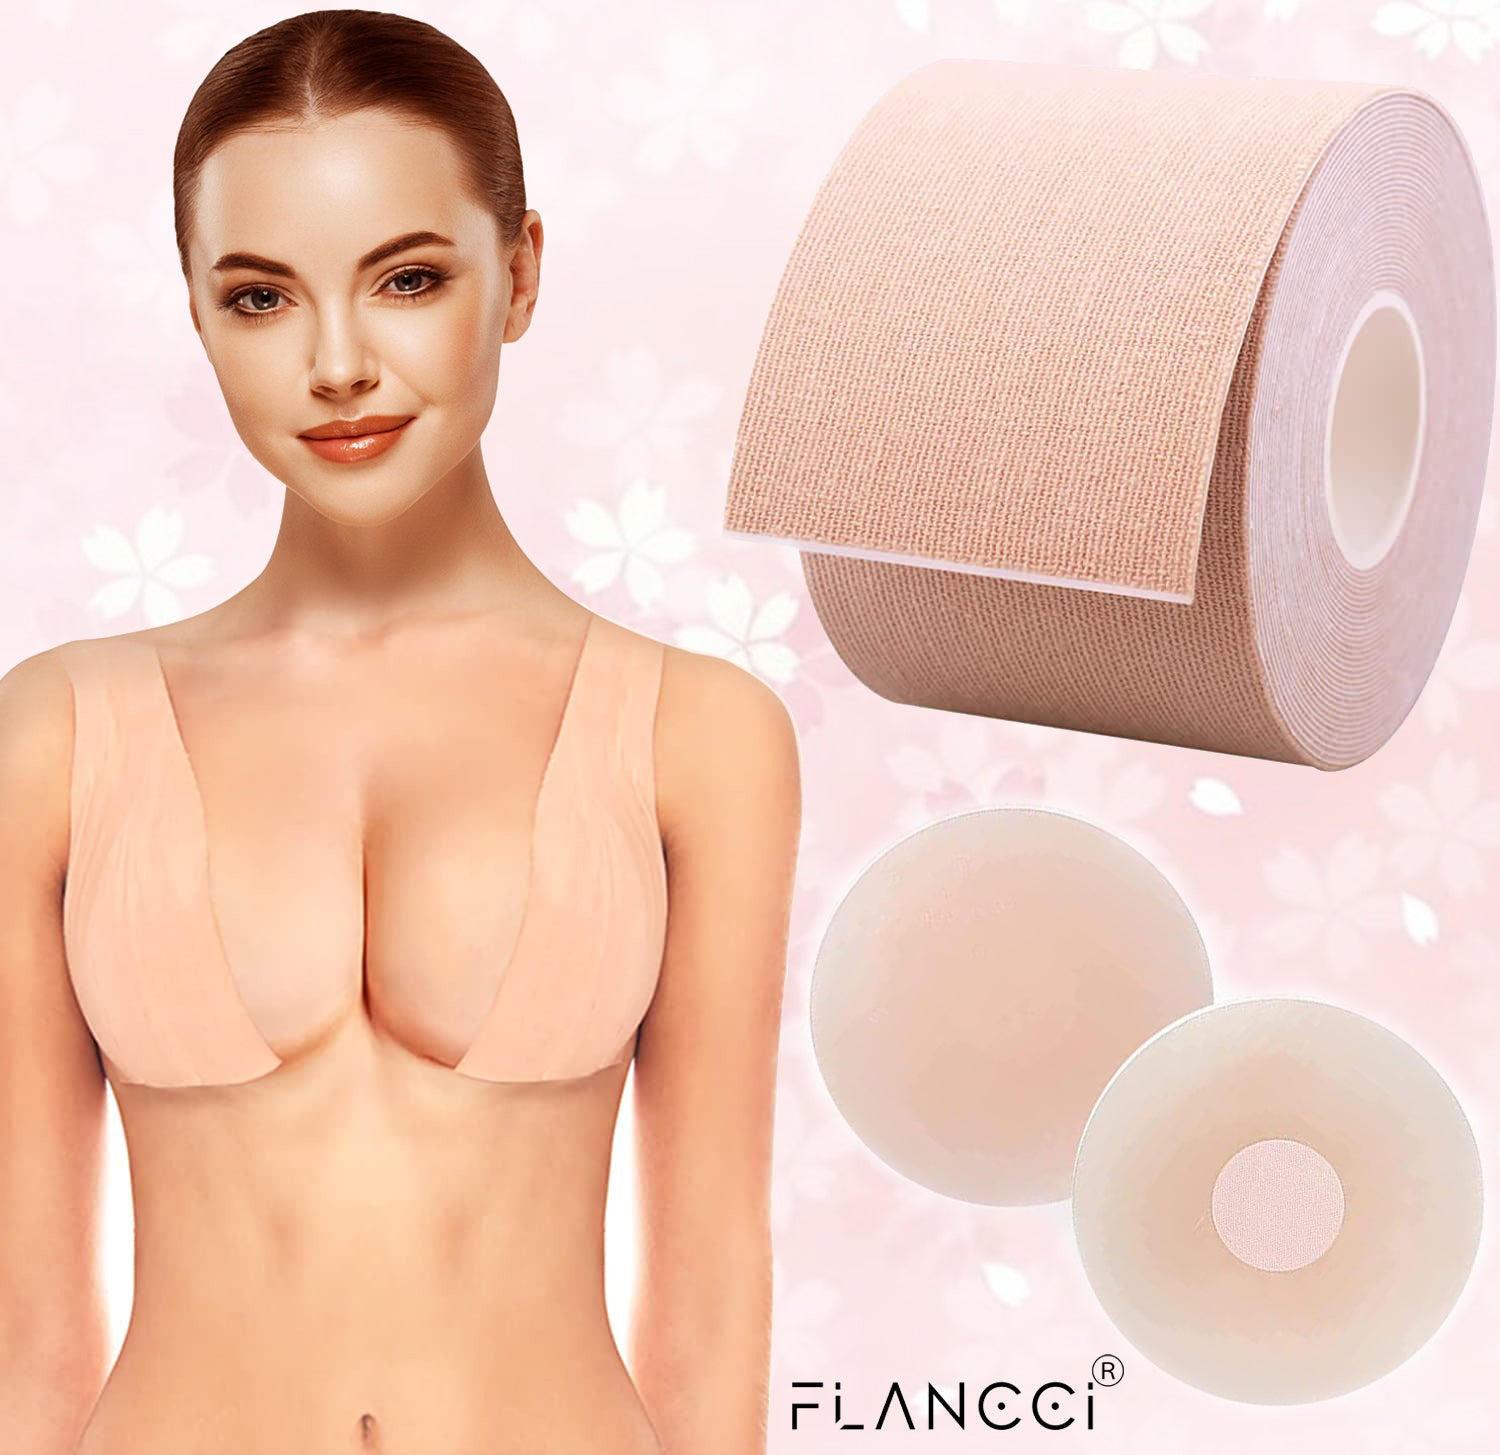 NEW ARRIVAL Boobytape for Breast Lift, Breast Tape for Large